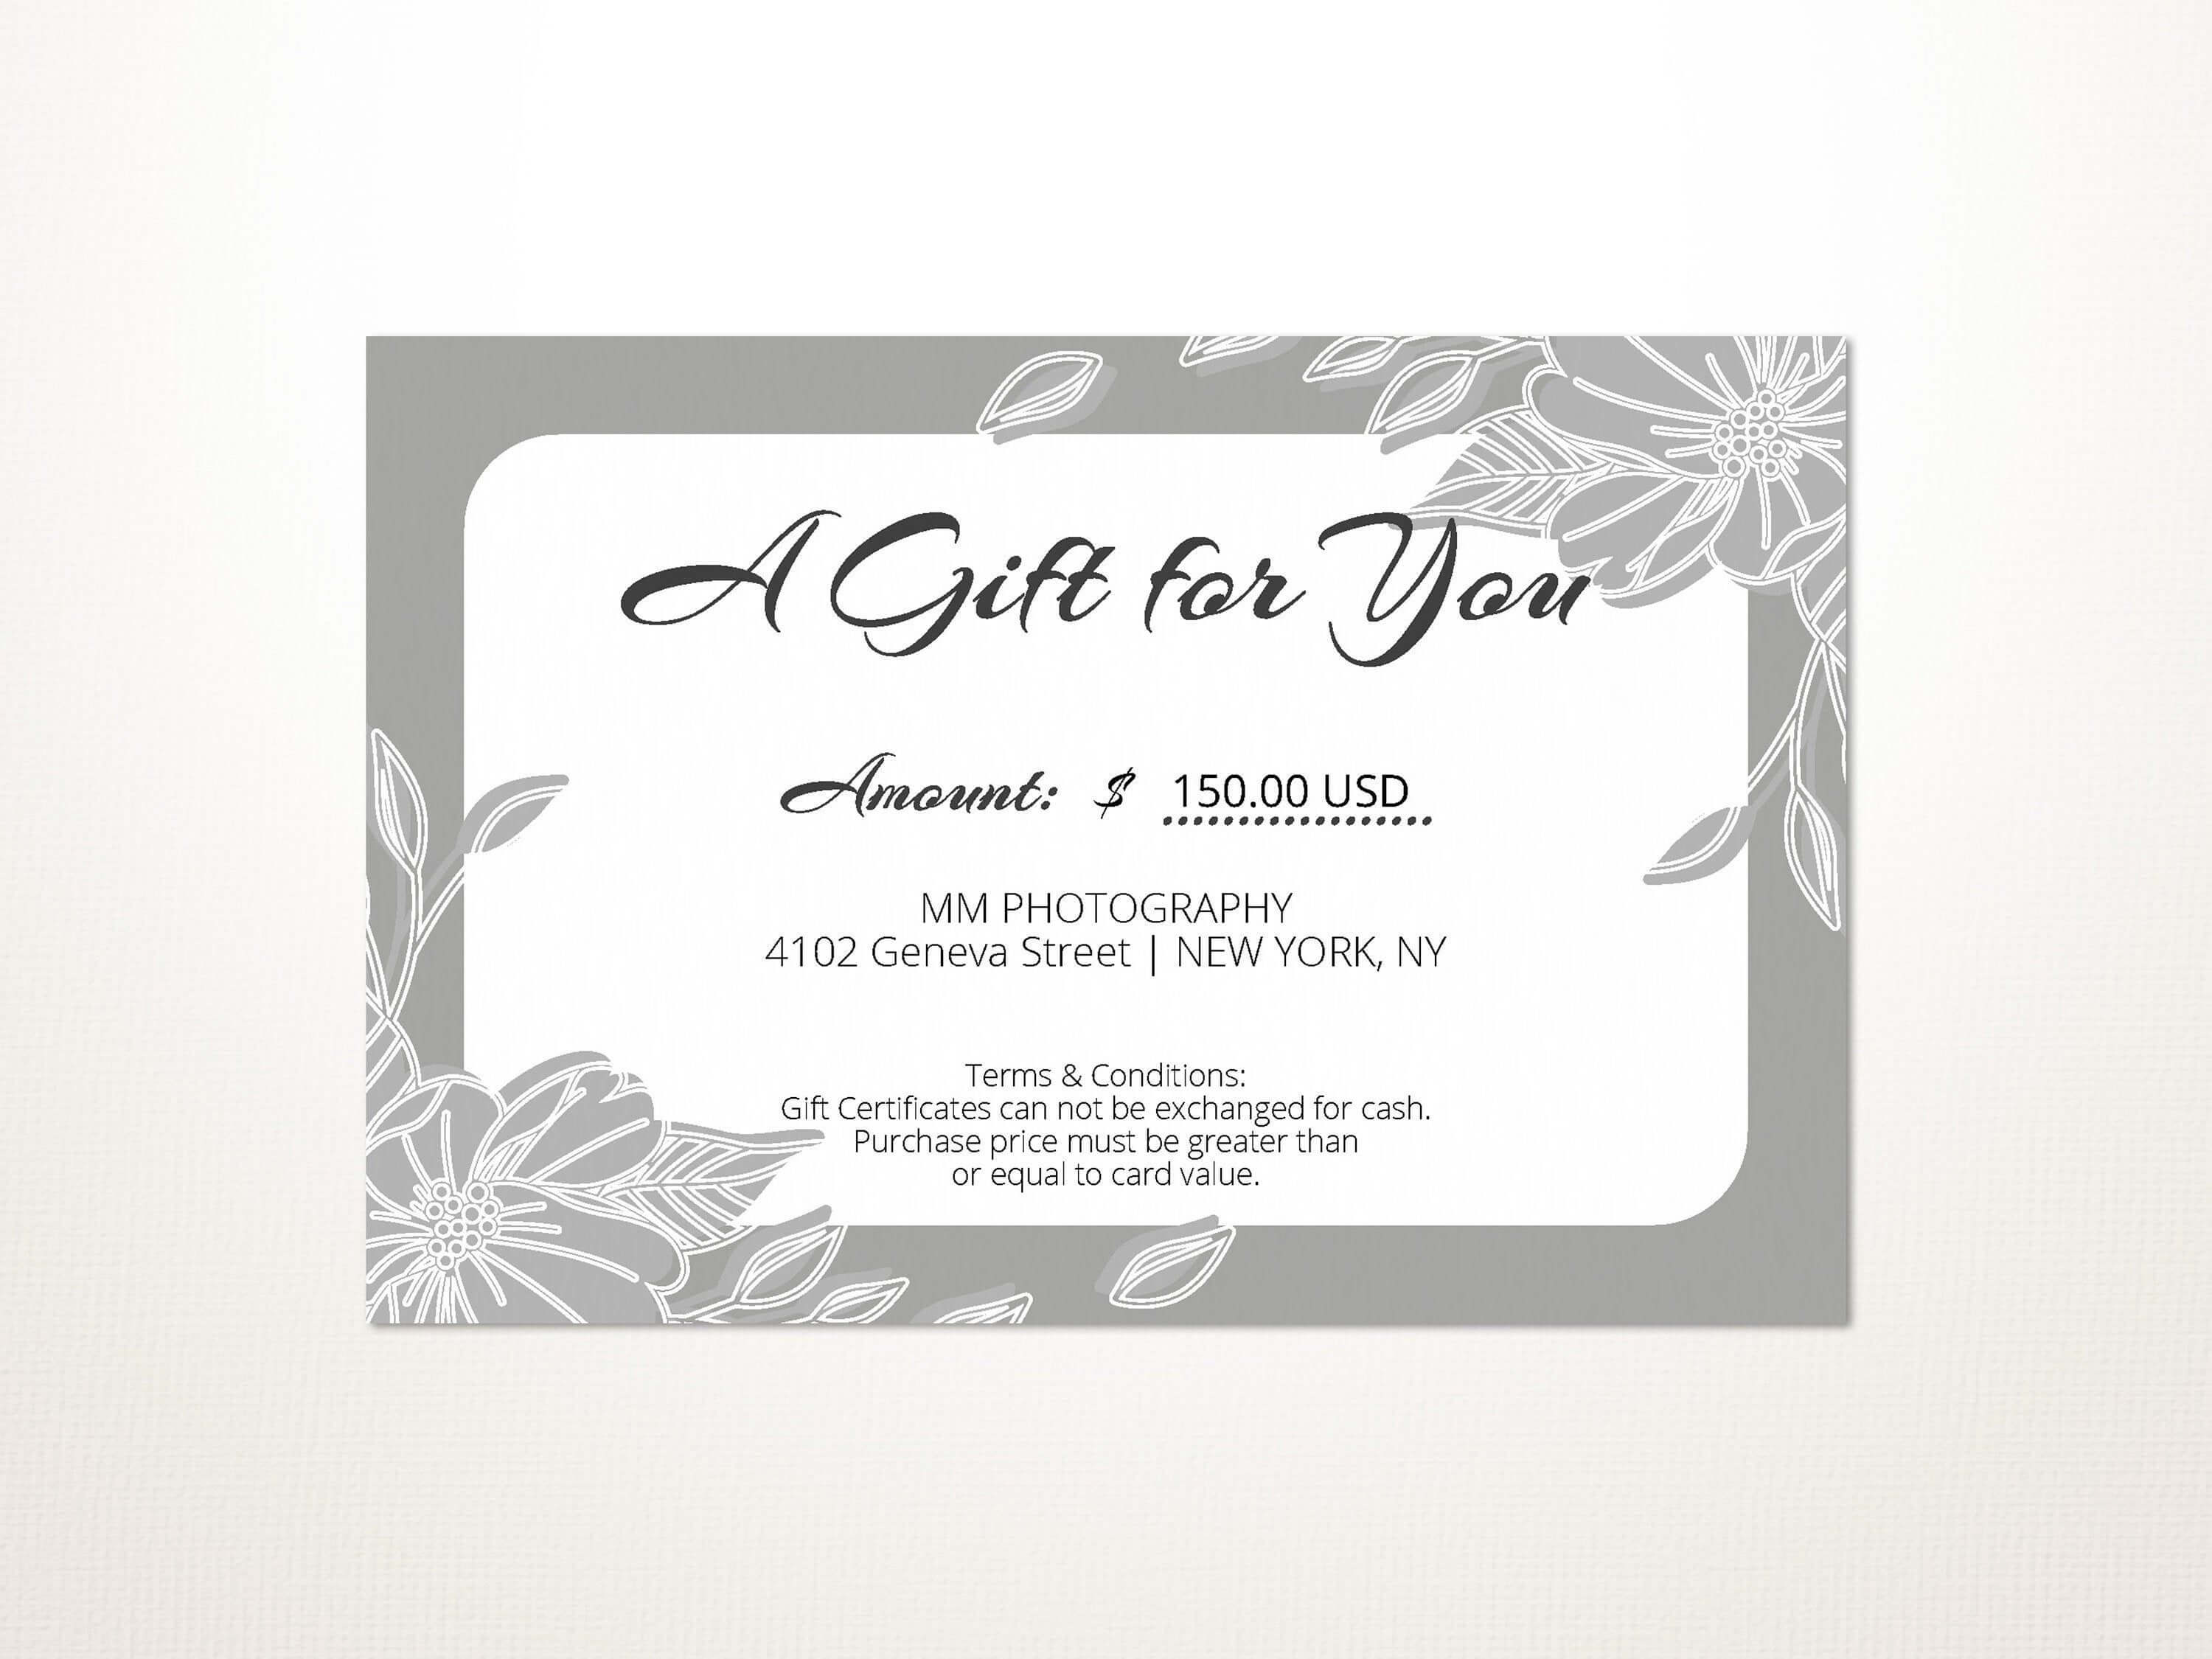 022 Wedding Gift Card Template Free Photographer Certificate Within Referral Card Template Free